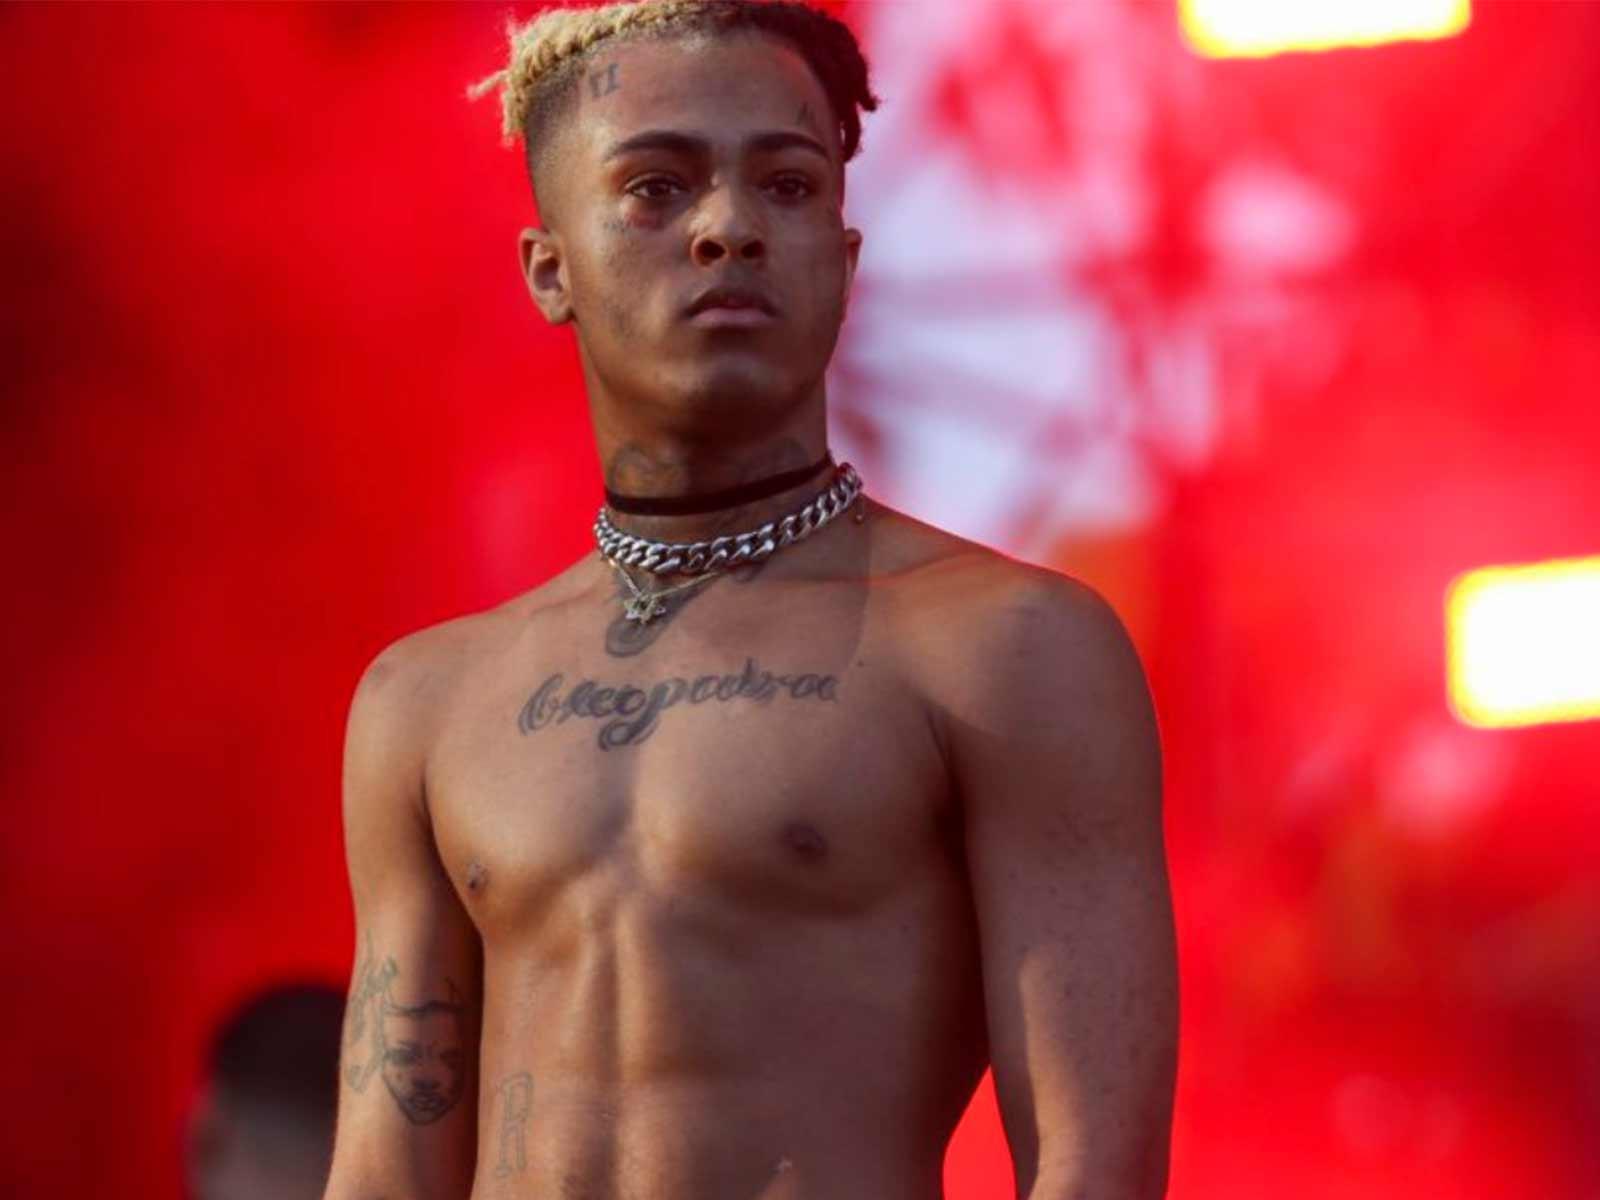 XXXTentacion Admitted to Domestic Abuse In Secret Audio Recording